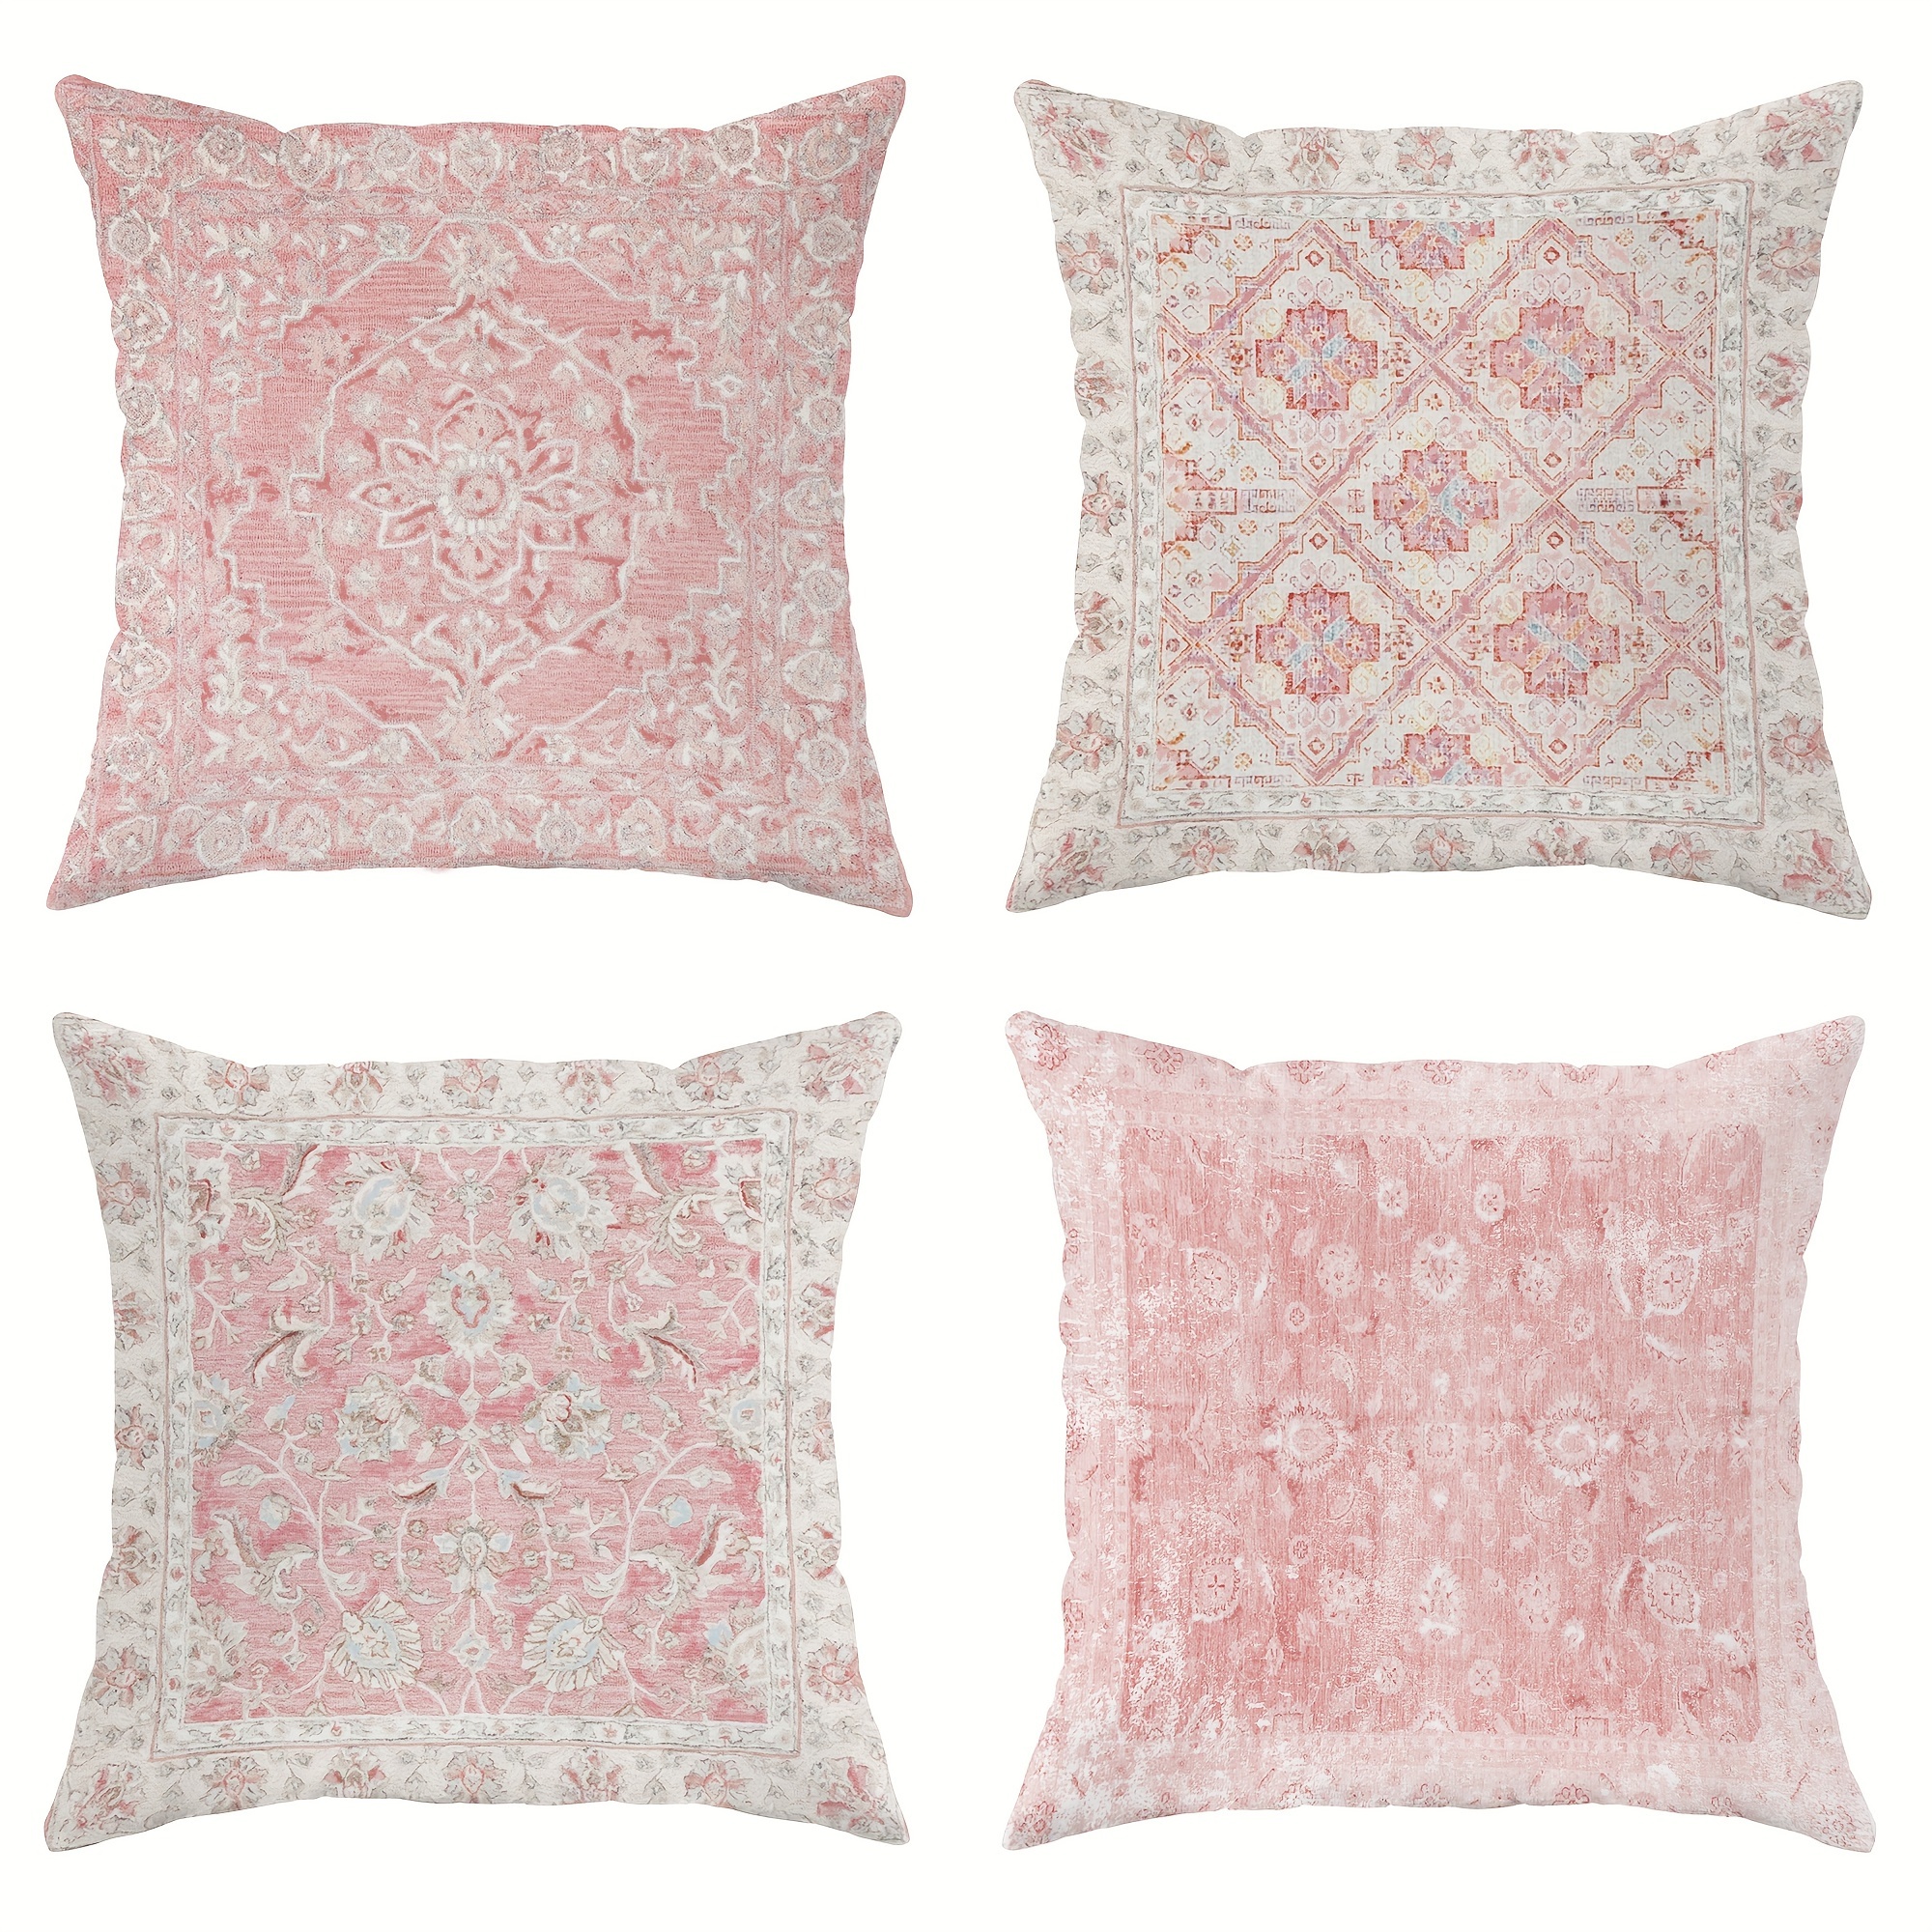 

4pcs, Geometric Light Pink Polyester Throw Pillow Covers, Vintage Persian Bohemian Ethnic Pillow Covers, Decorative Cushion Covers 45×45cm/18 "x18" For Living Room Bedroom Sofa Bed Decoration